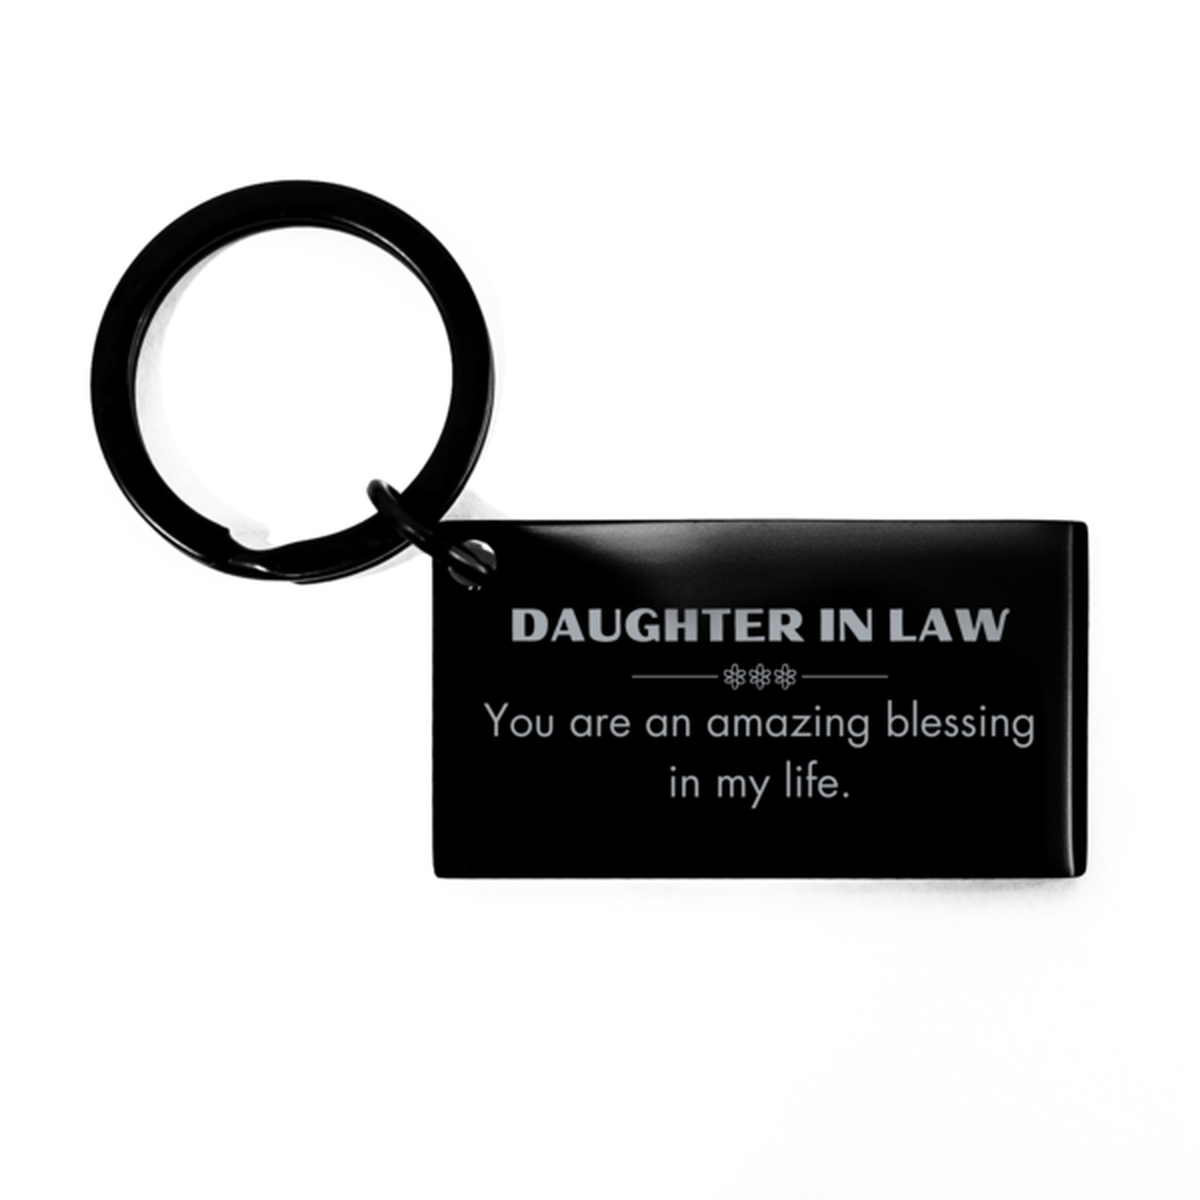 Daughter In Law Keychain, You are an amazing blessing in my life, Thank You Gifts For Daughter In Law, Inspirational Birthday Christmas Unique Gifts For Daughter In Law